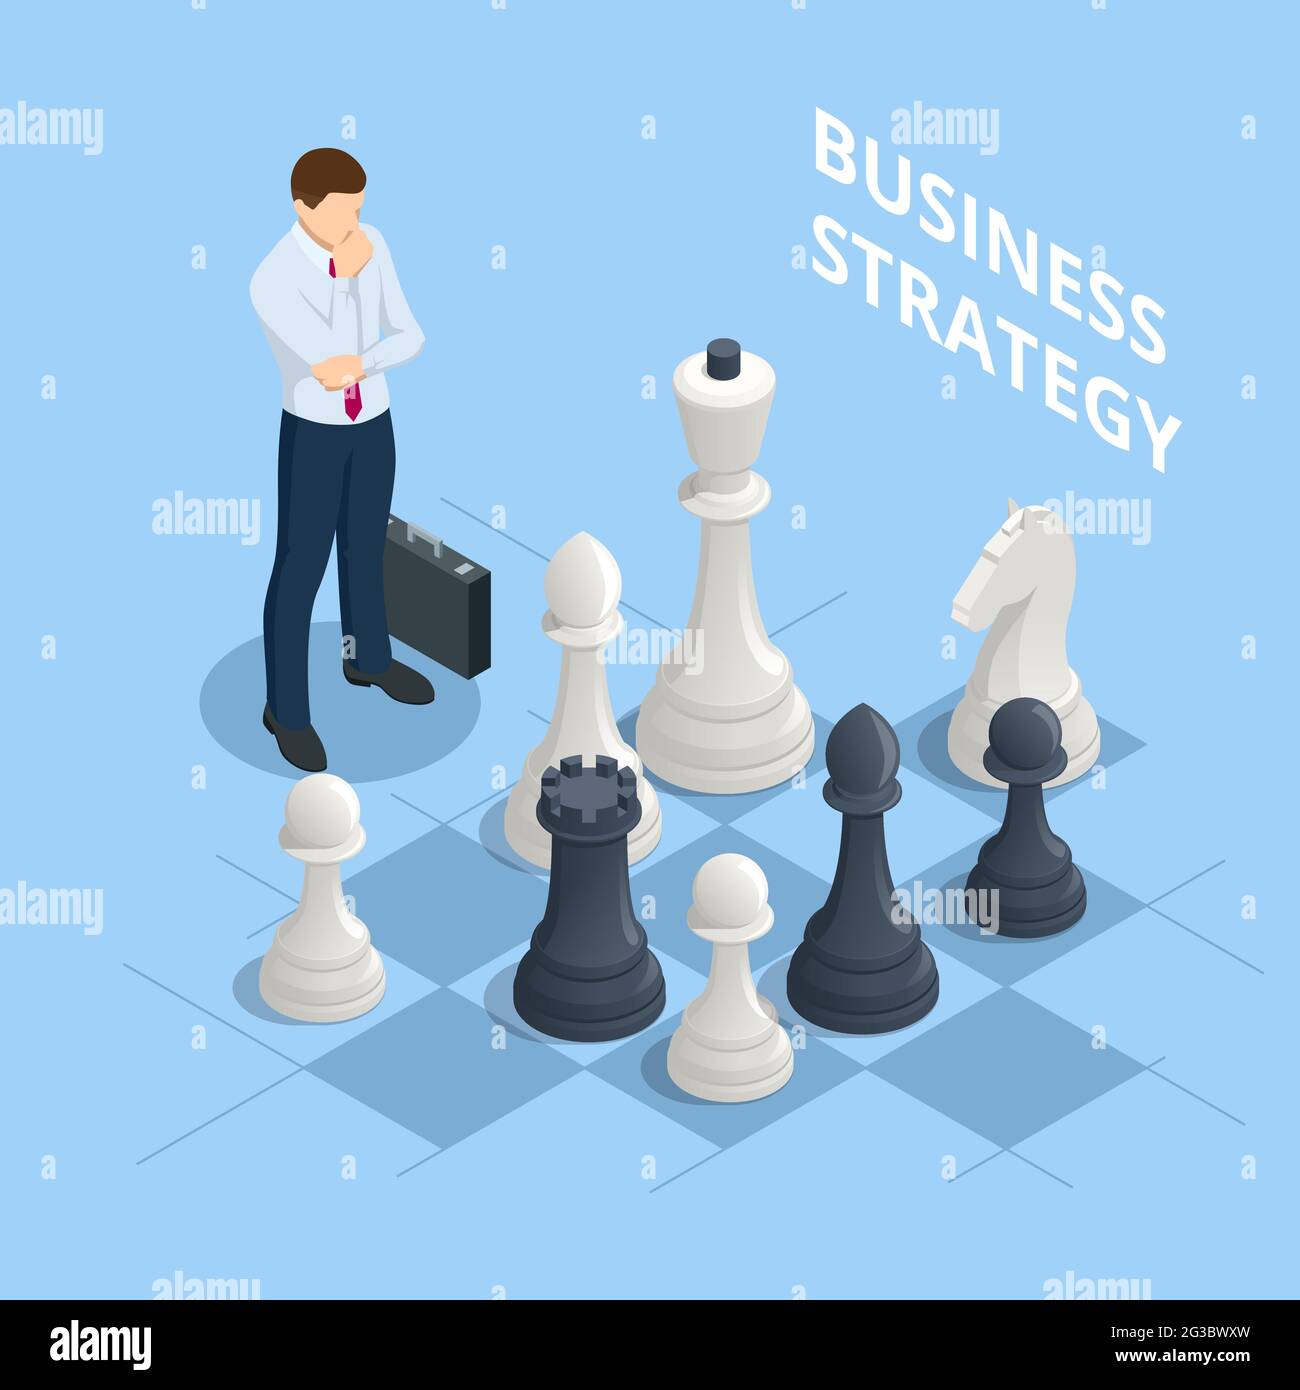 CHESS: The Game of Strategy